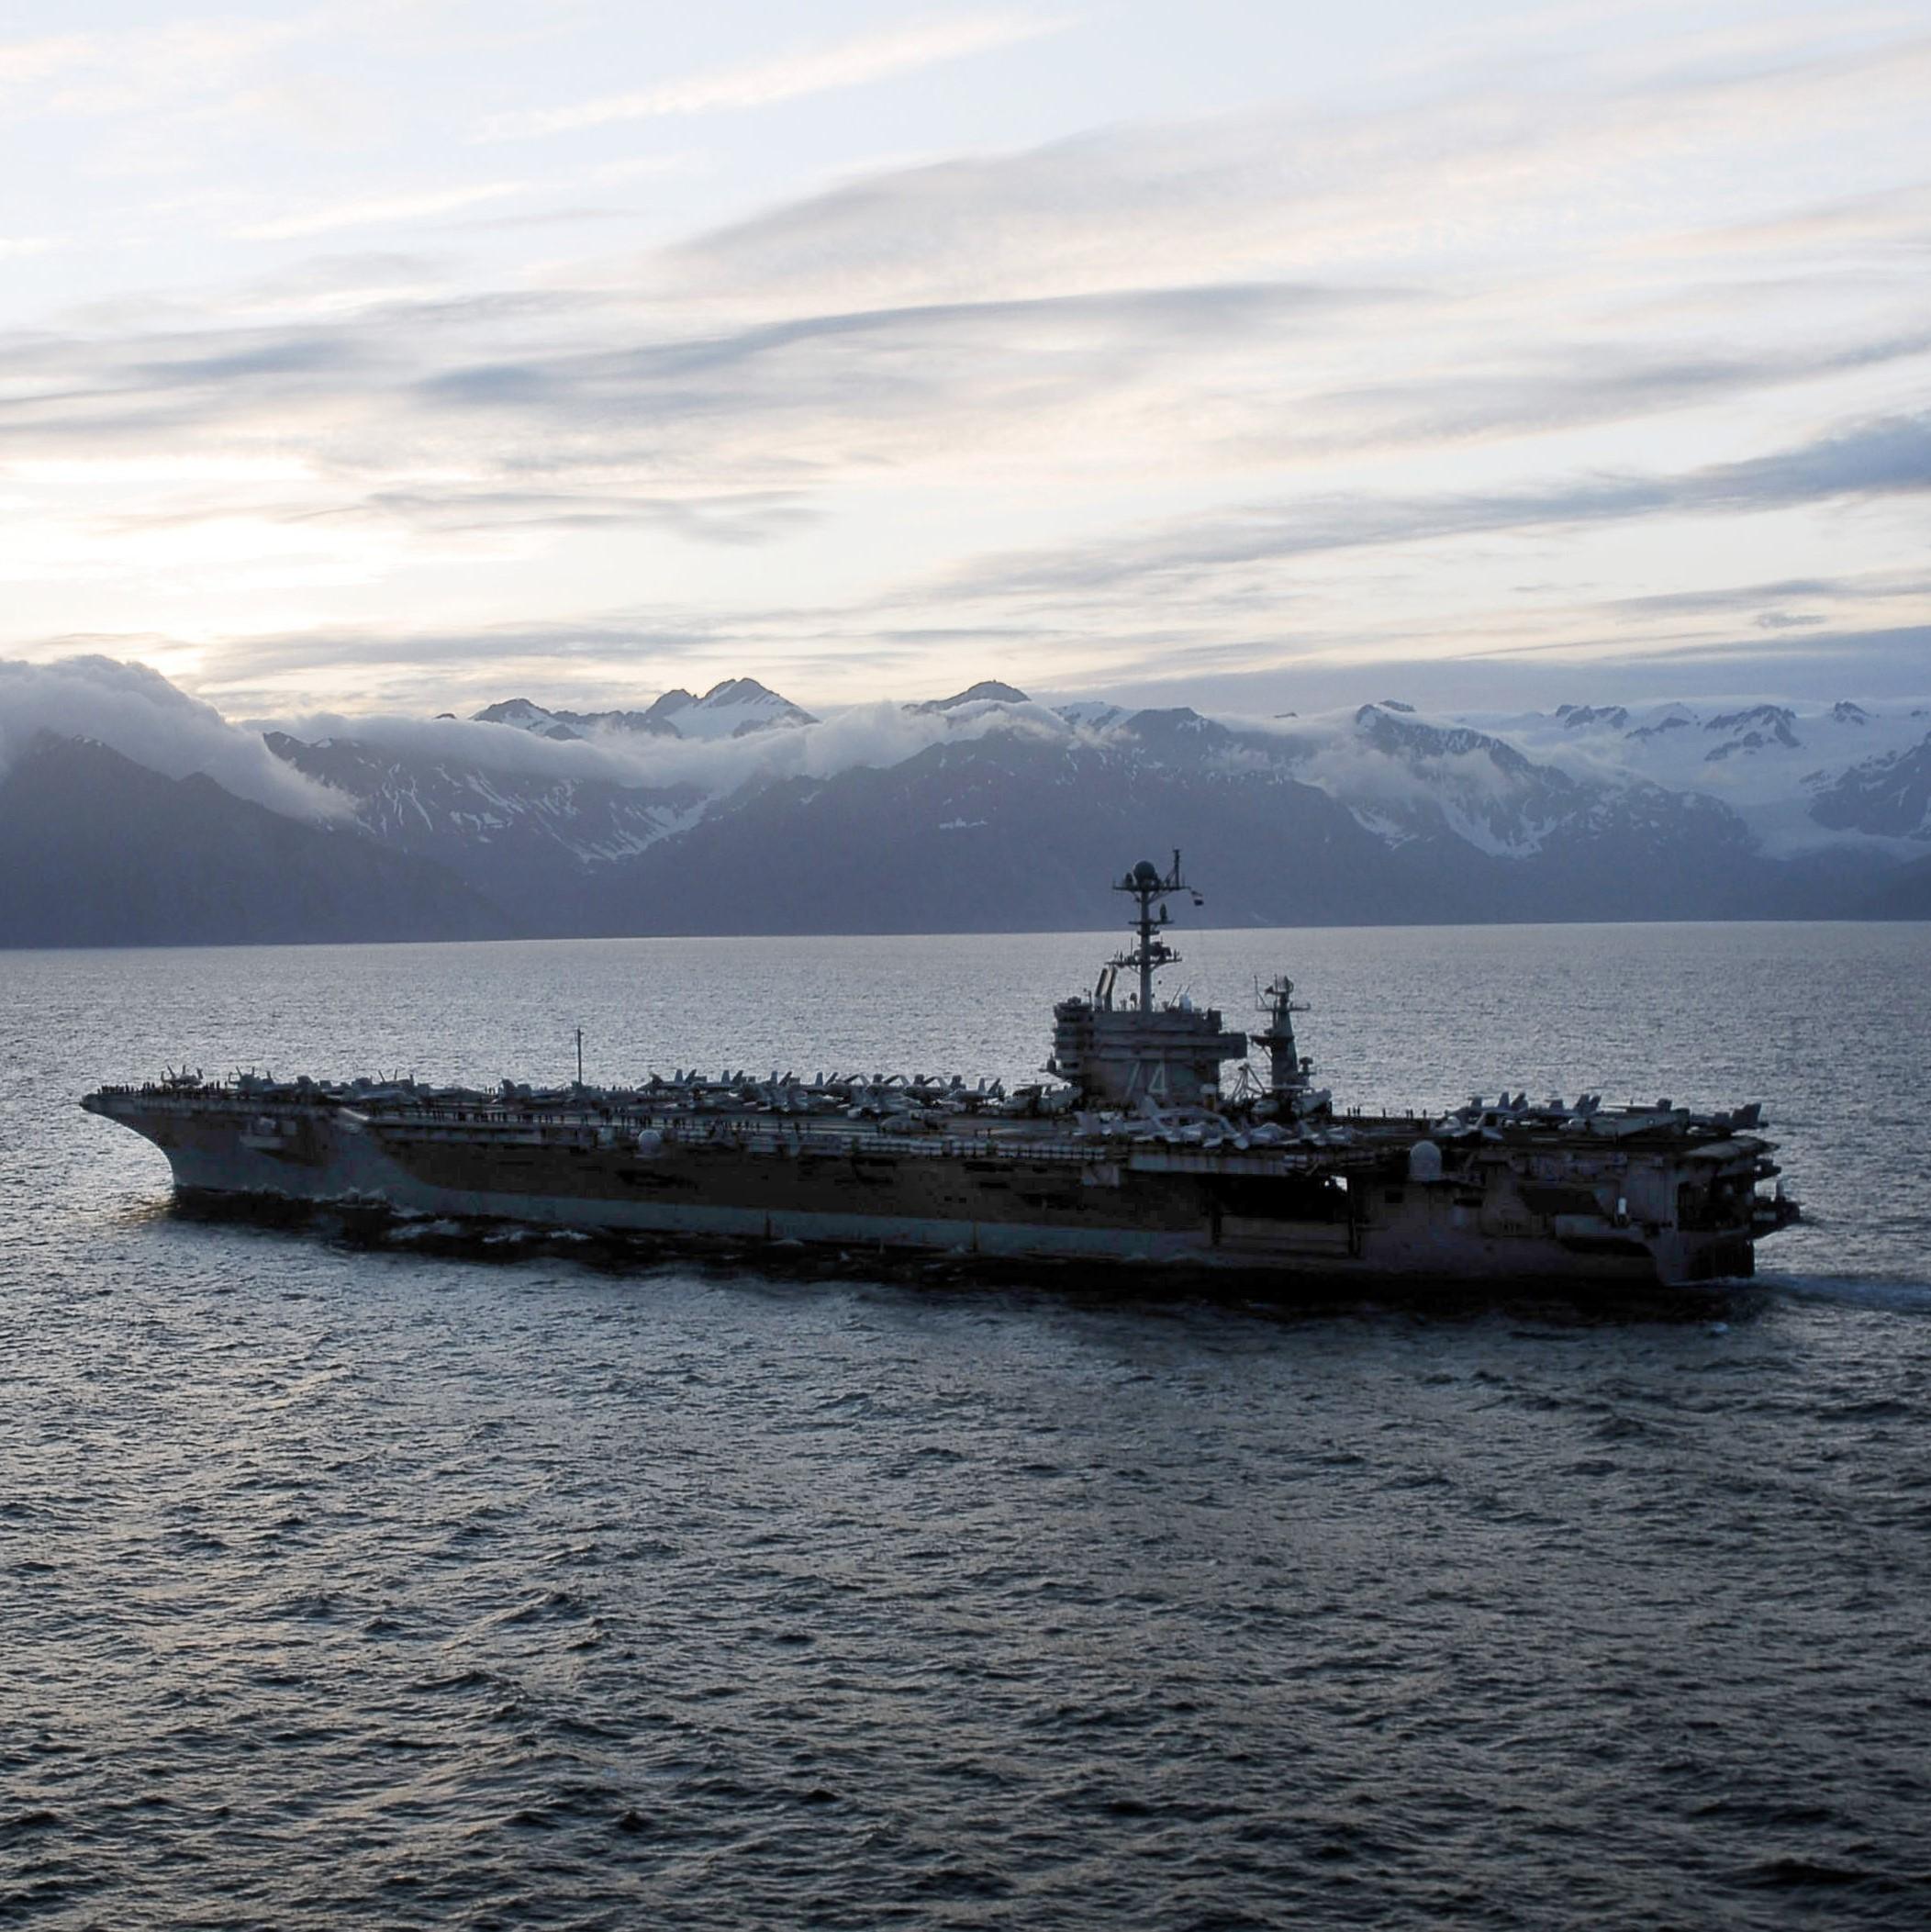 Northern Edge military training exercise in the Gulf of Alaska. (Photo courtesy of the U.S. Navy)